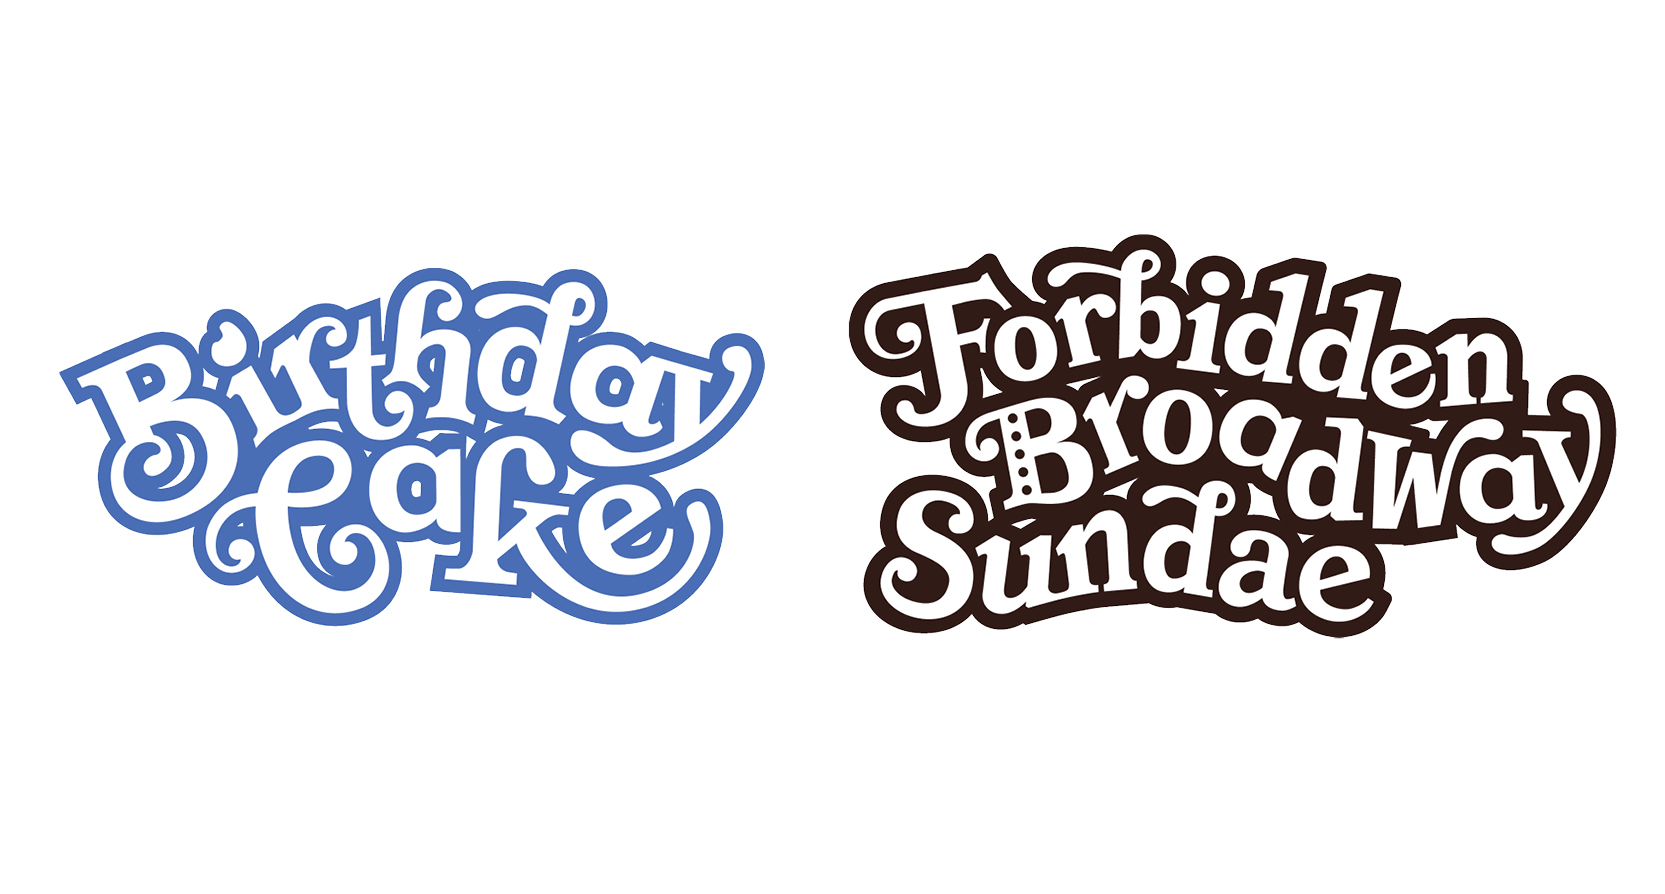 A picture that shows two sets of logos one with text: Birthday Cake. The other has the text: Forbidden Broadway Sundae.